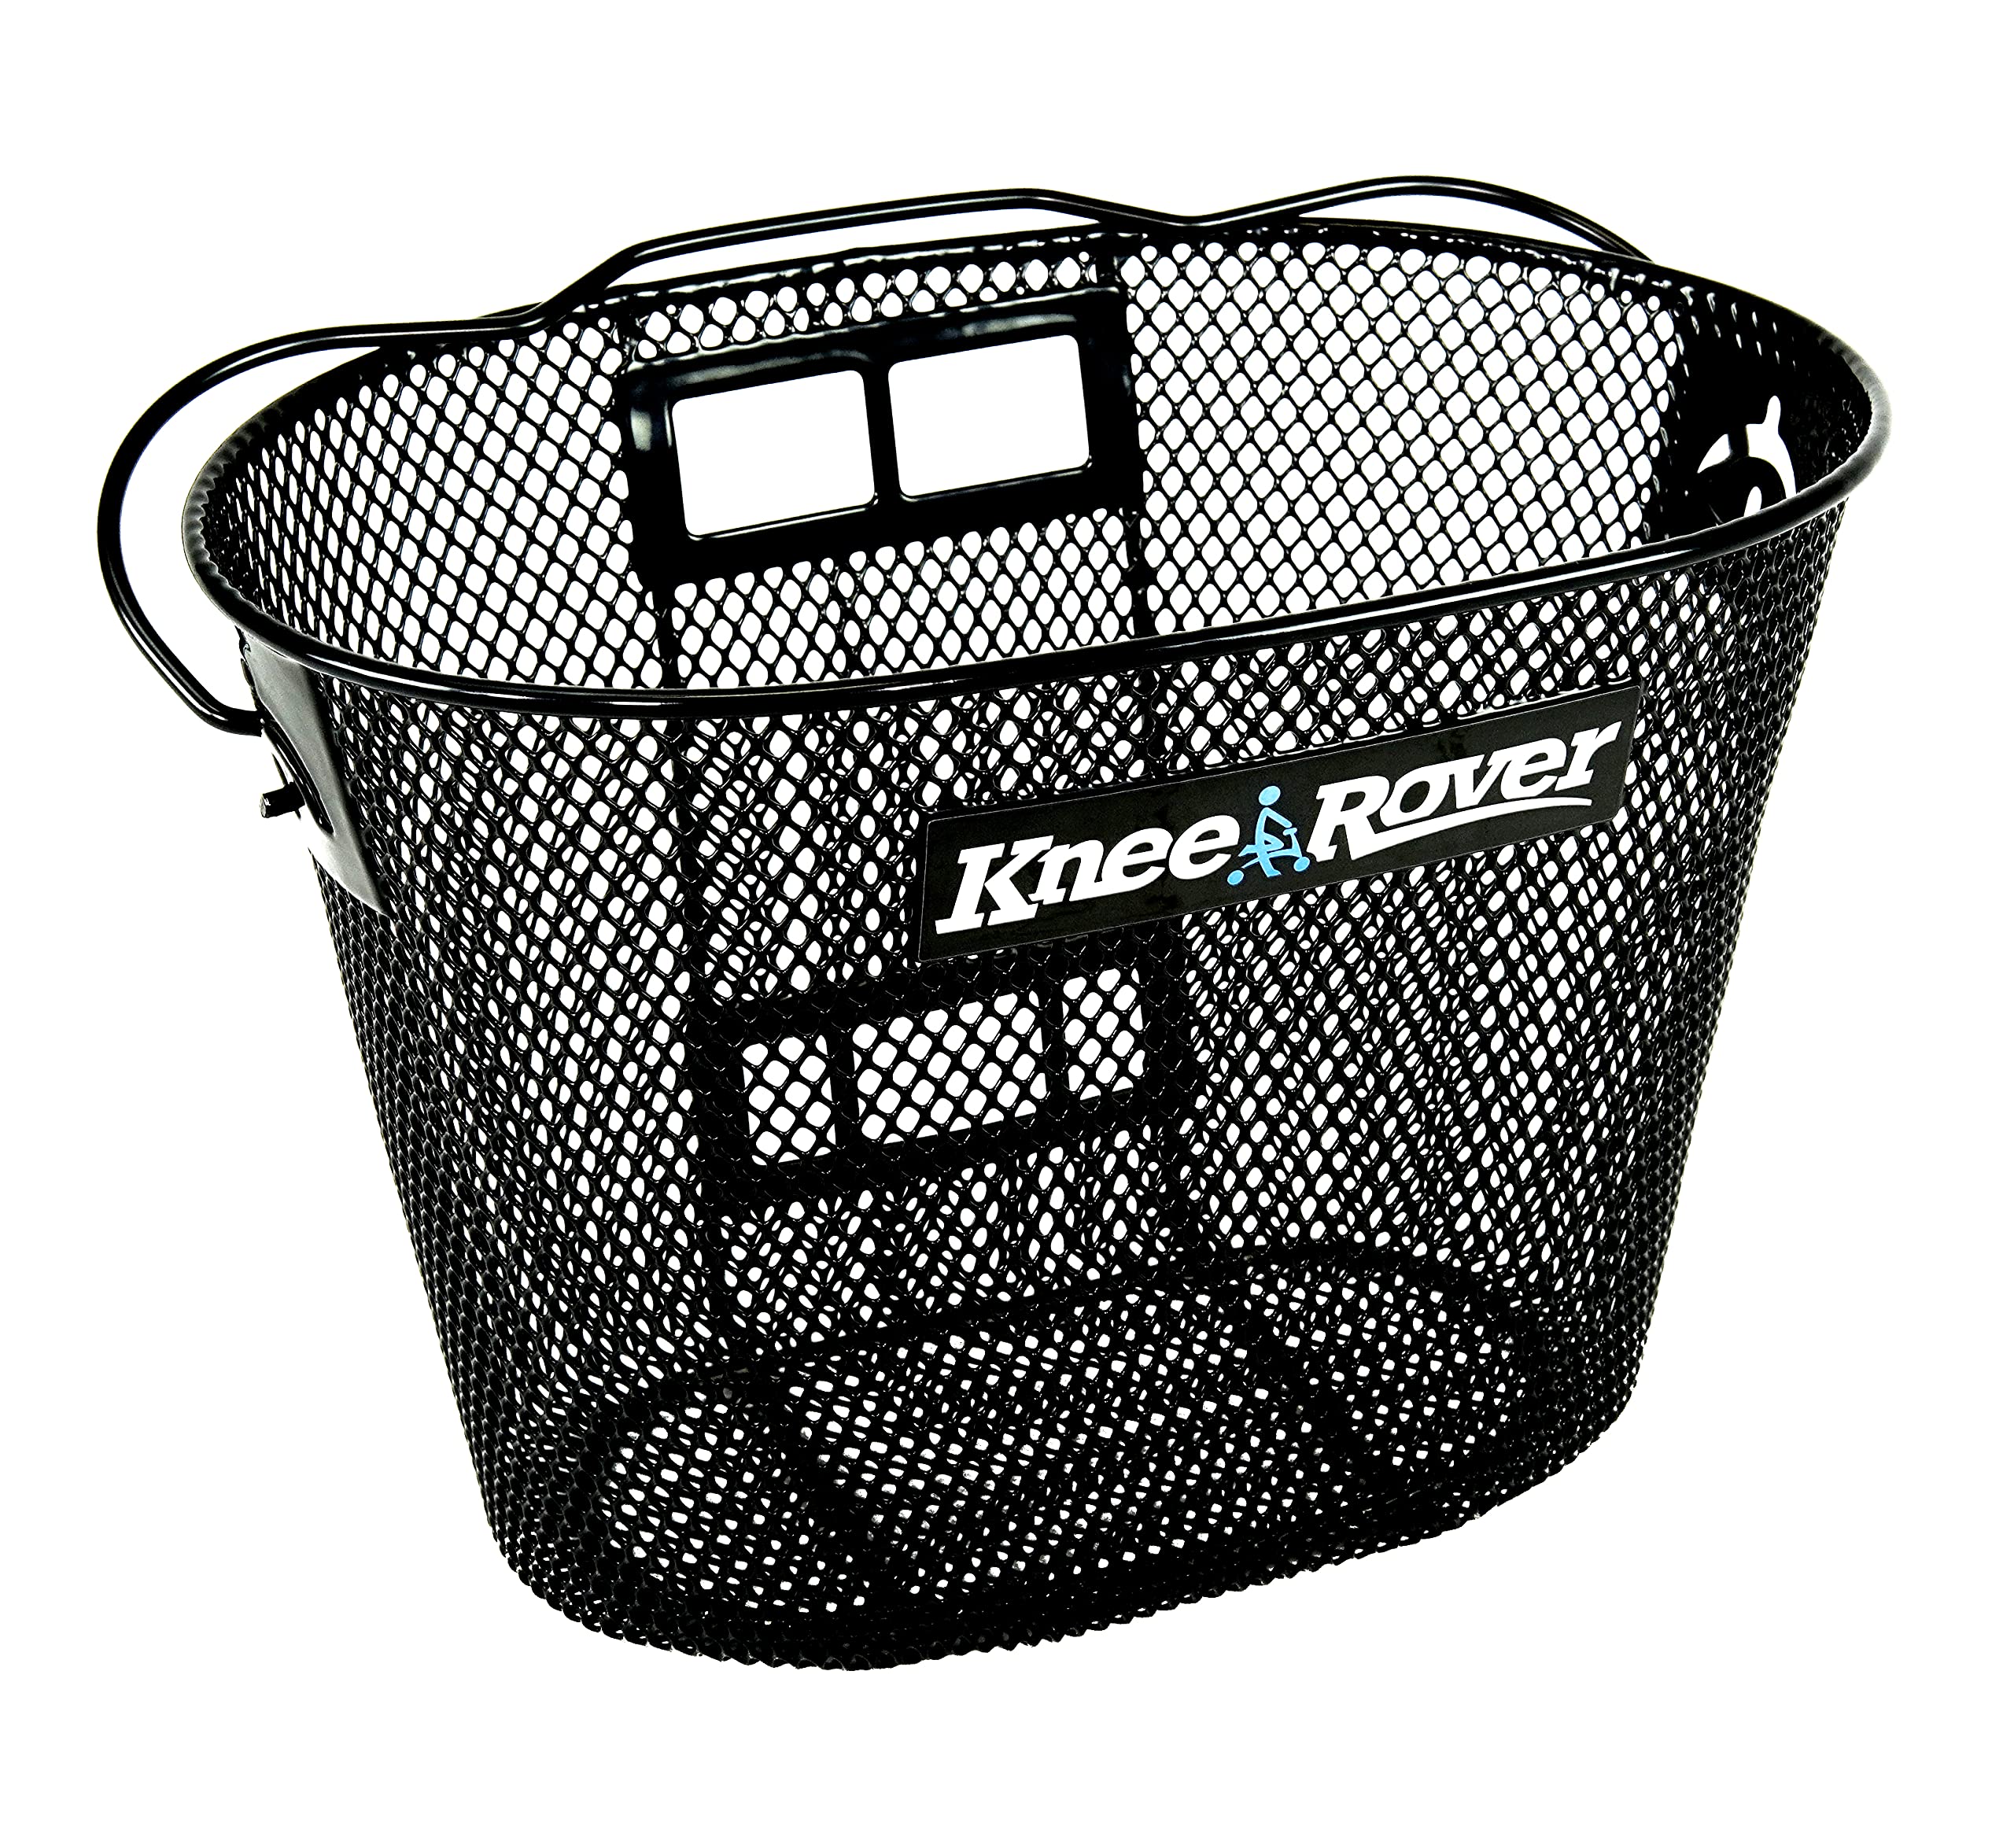 KneeRover Knee Scooter Basket Accessory with Convenient Handle - Compatible with Most Knee Scooters